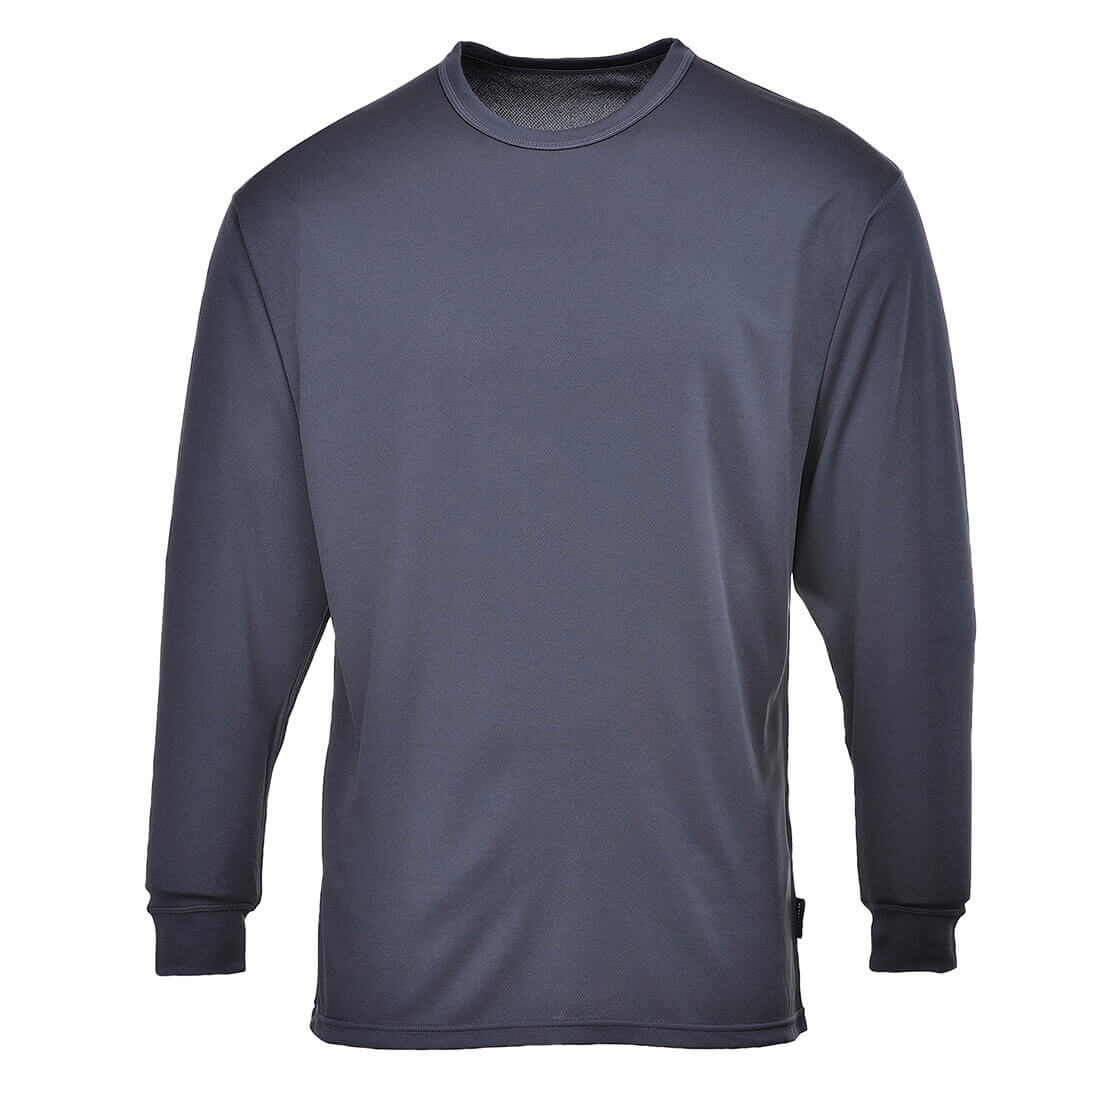 Image of Base Layer Thermal Top Long Sleeve Charcoal L